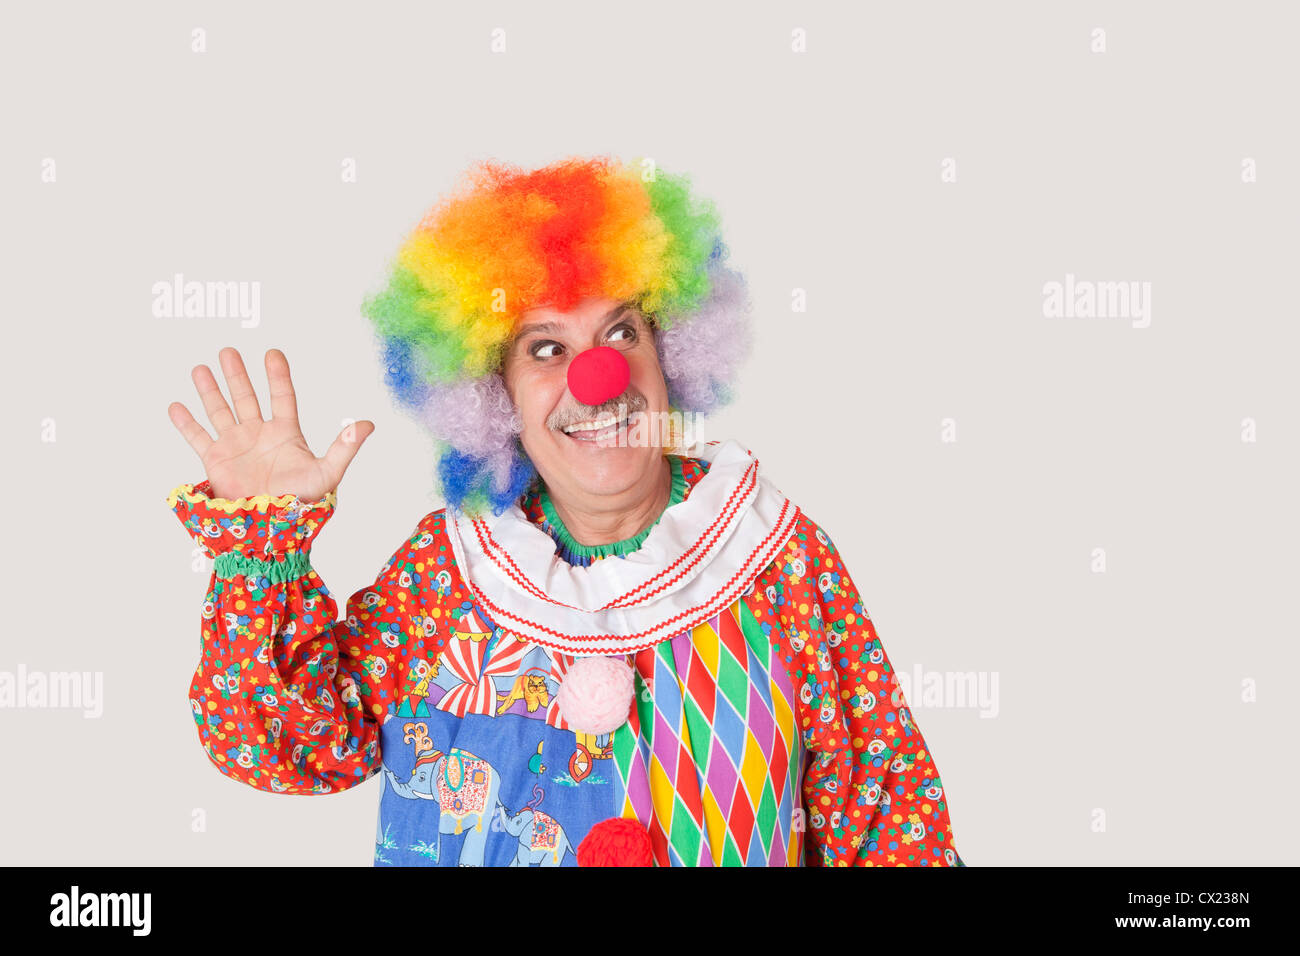 Cheerful senior male clown waving hand while looking away over gray background Stock Photo